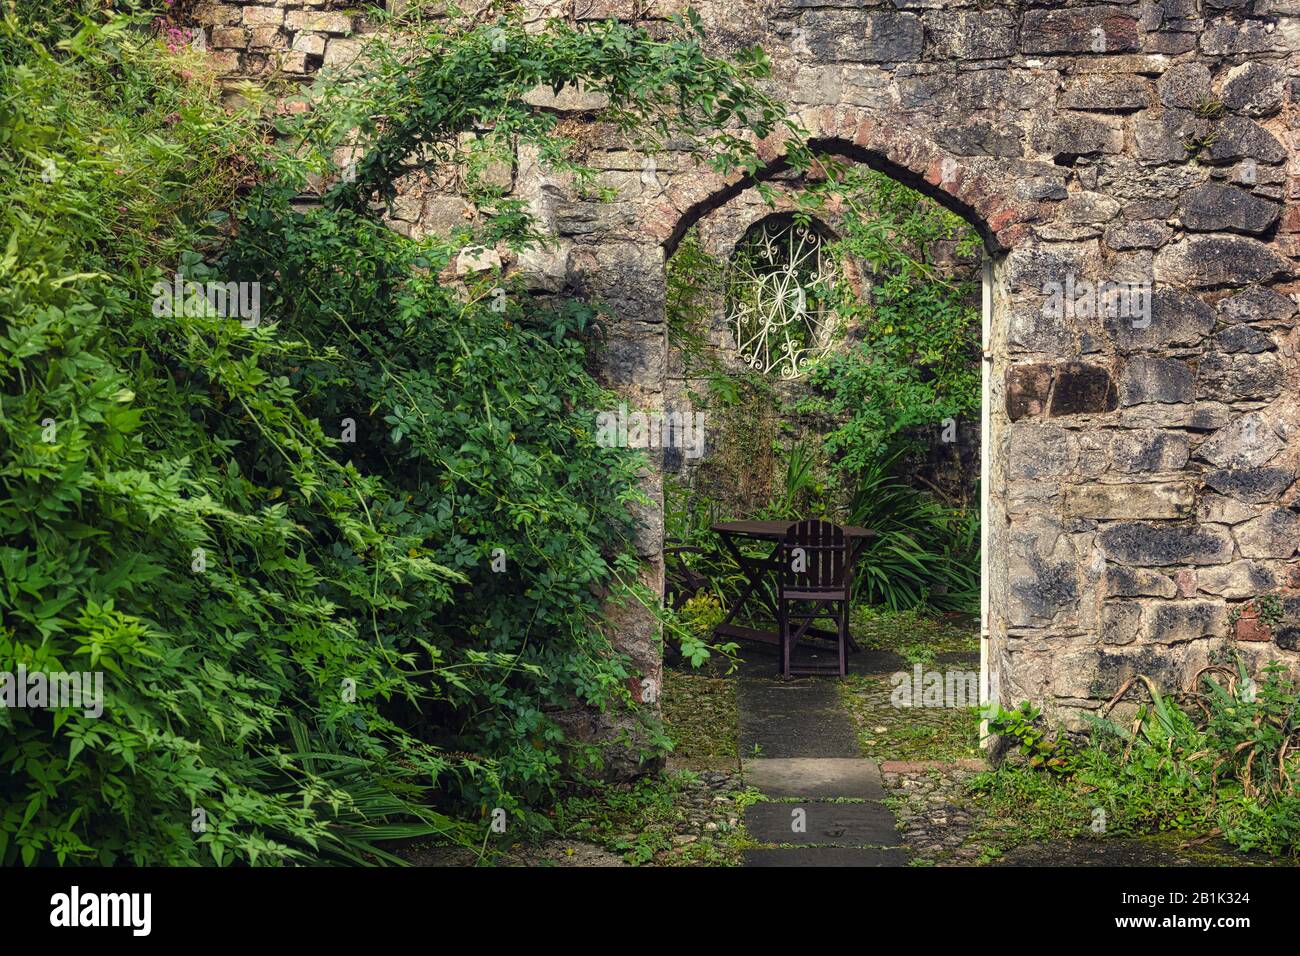 Rustic old stone archway in an overgrown secluded garden with climbing plants  and tables and chairs Stock Photo